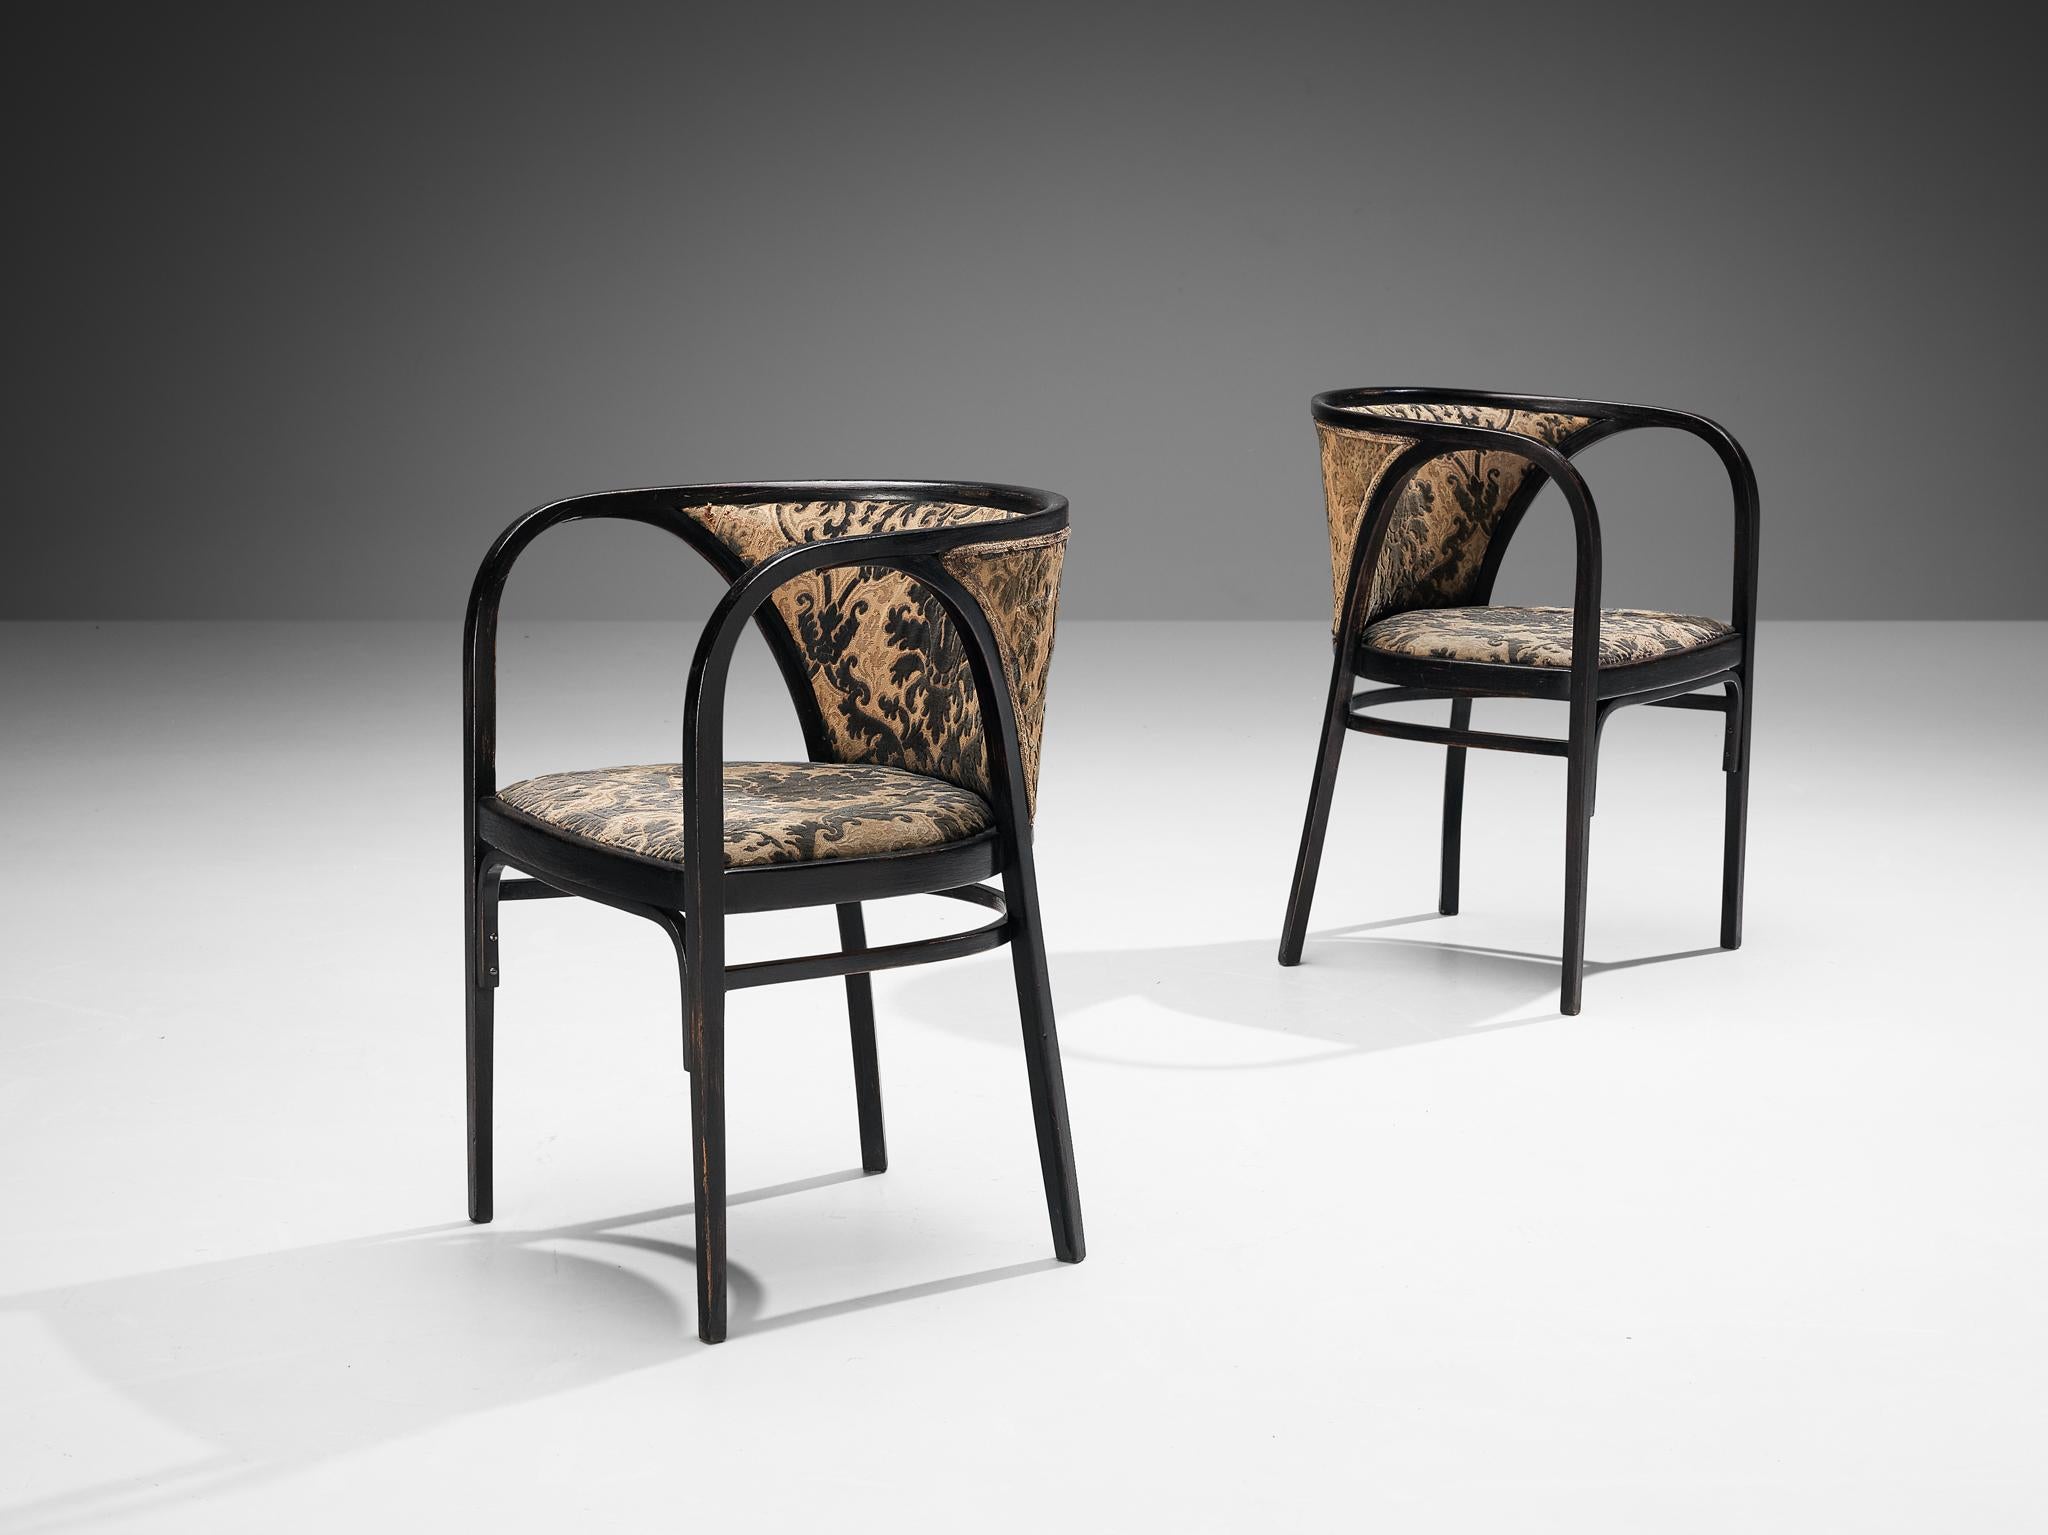 Attributed to Marcel Kammerer for Thonet, pair of armchairs, bentwood and fabric, Austria, ca. 1910

A pair of armchairs of which the frame is composed of elegantly curved lines and round edges, contributing to the chair’s sculptural appearance. The